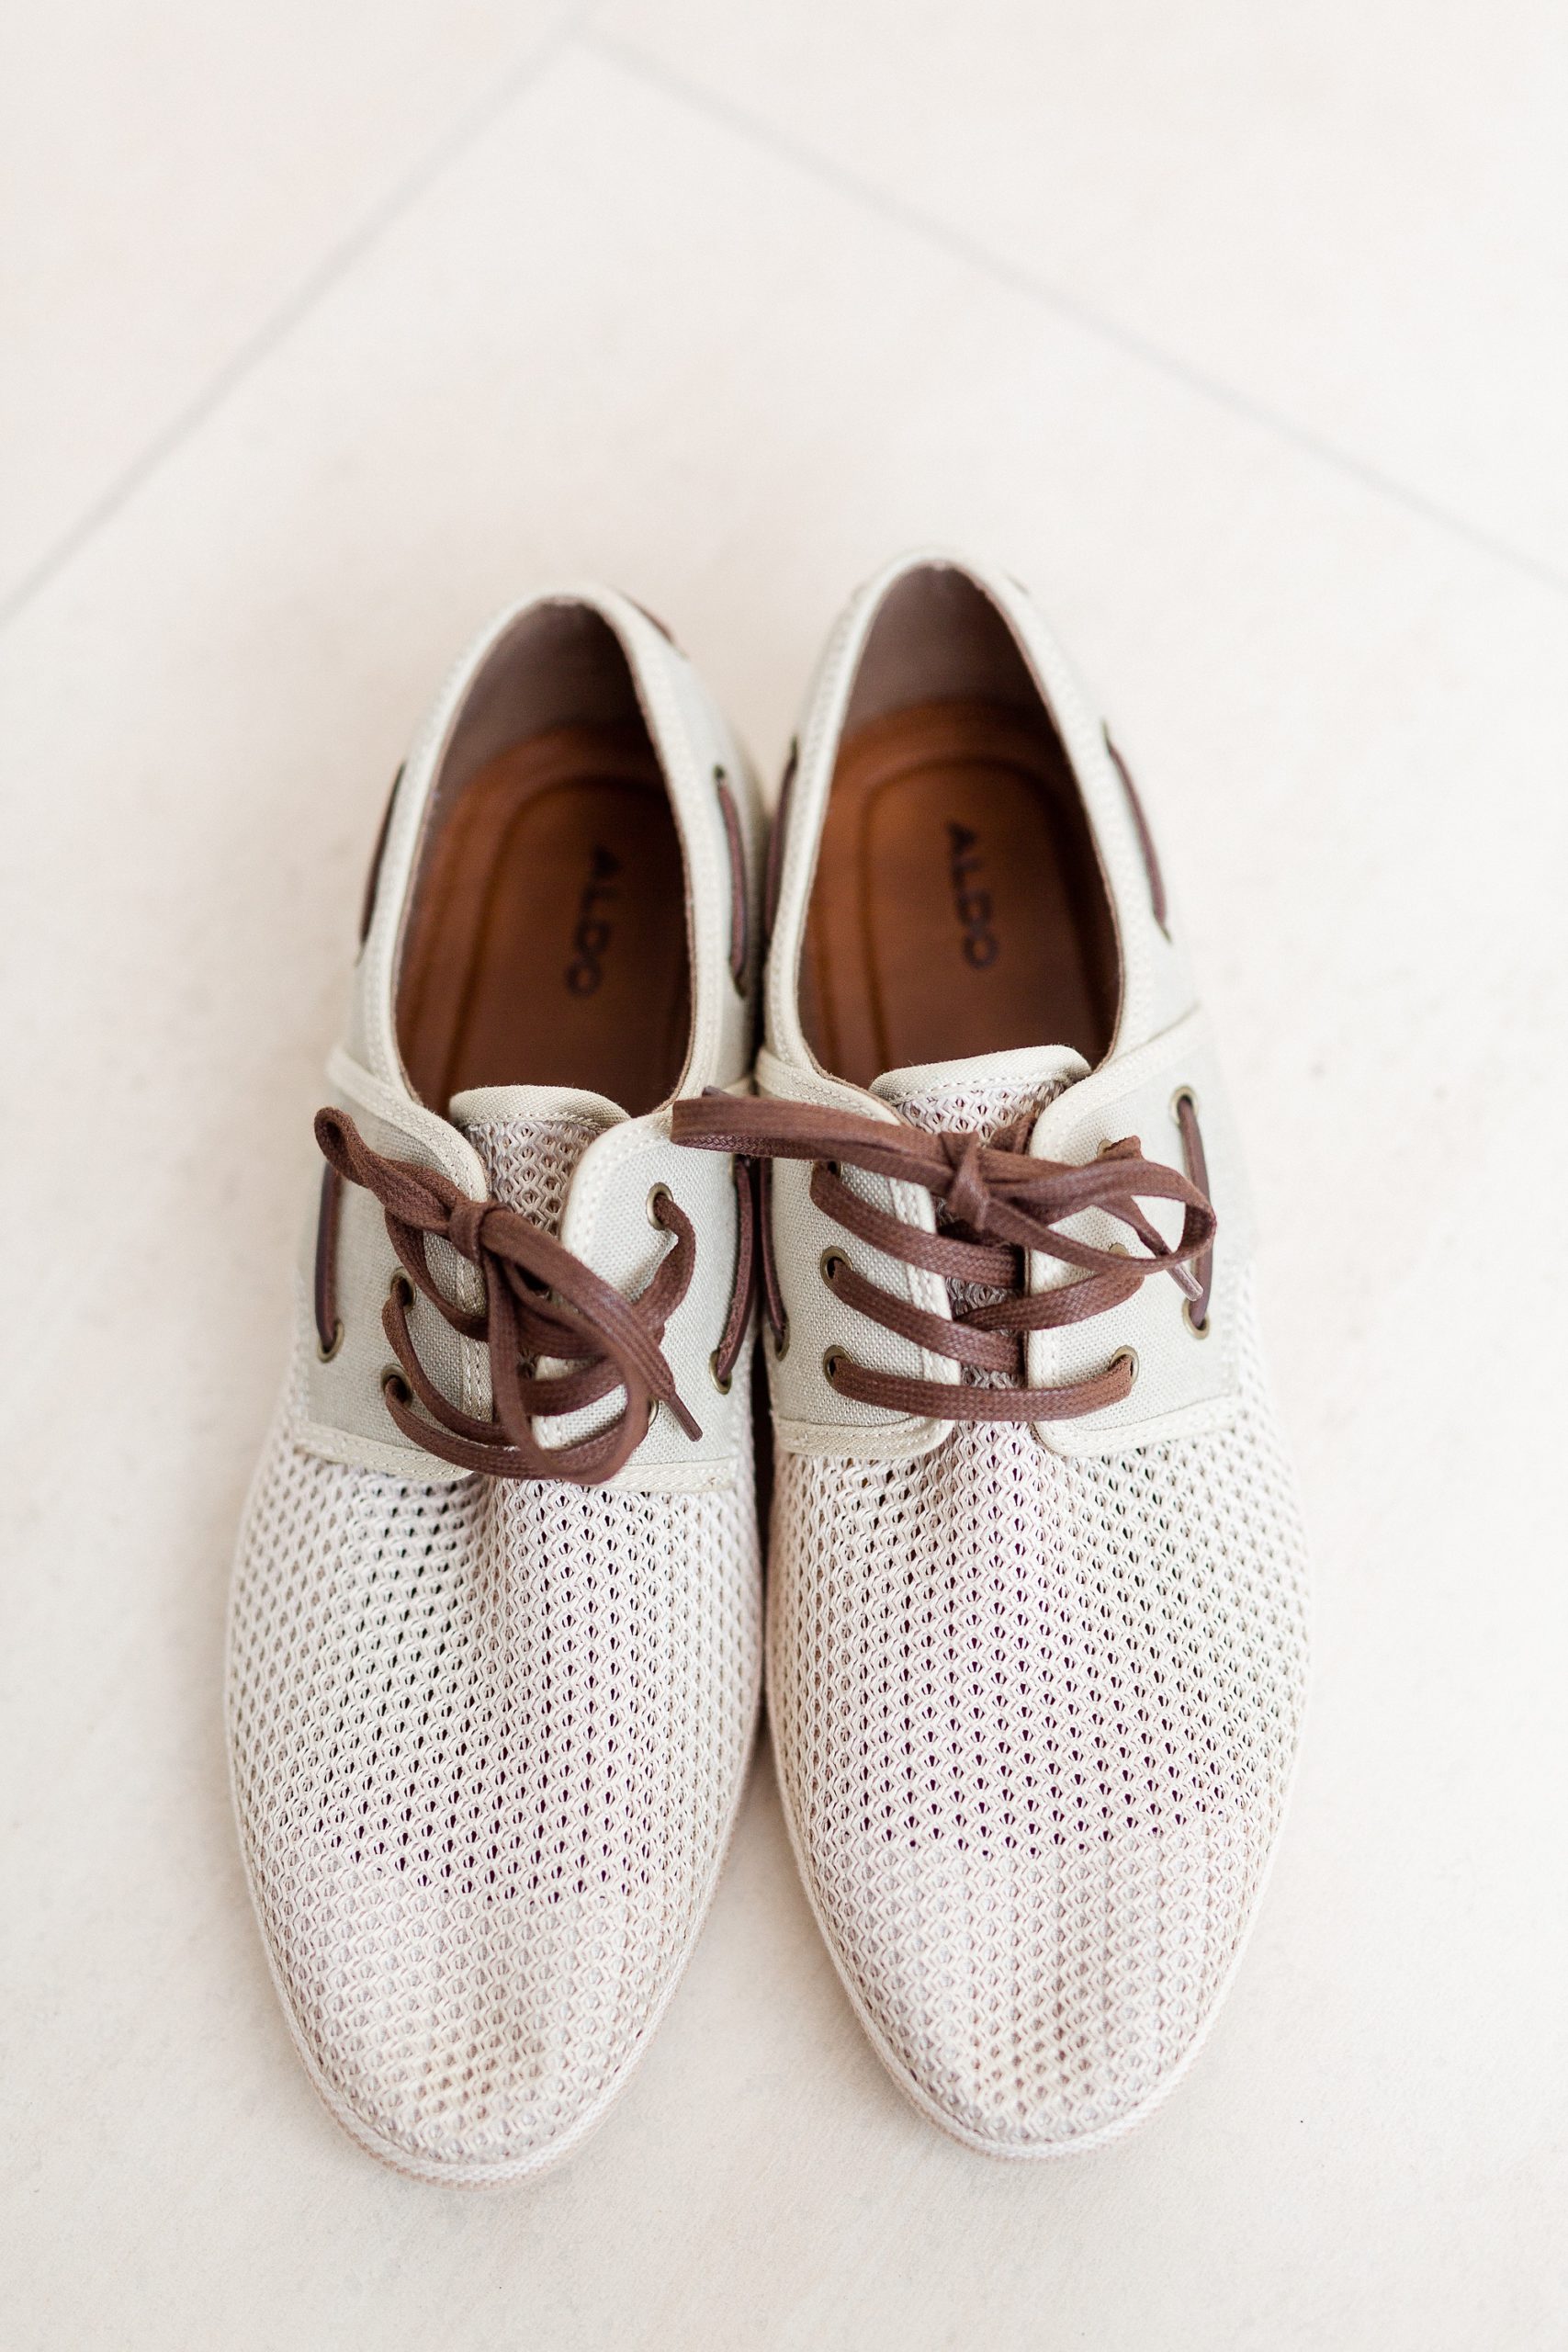 groom's tan shoes for beach wedding in St Lucia